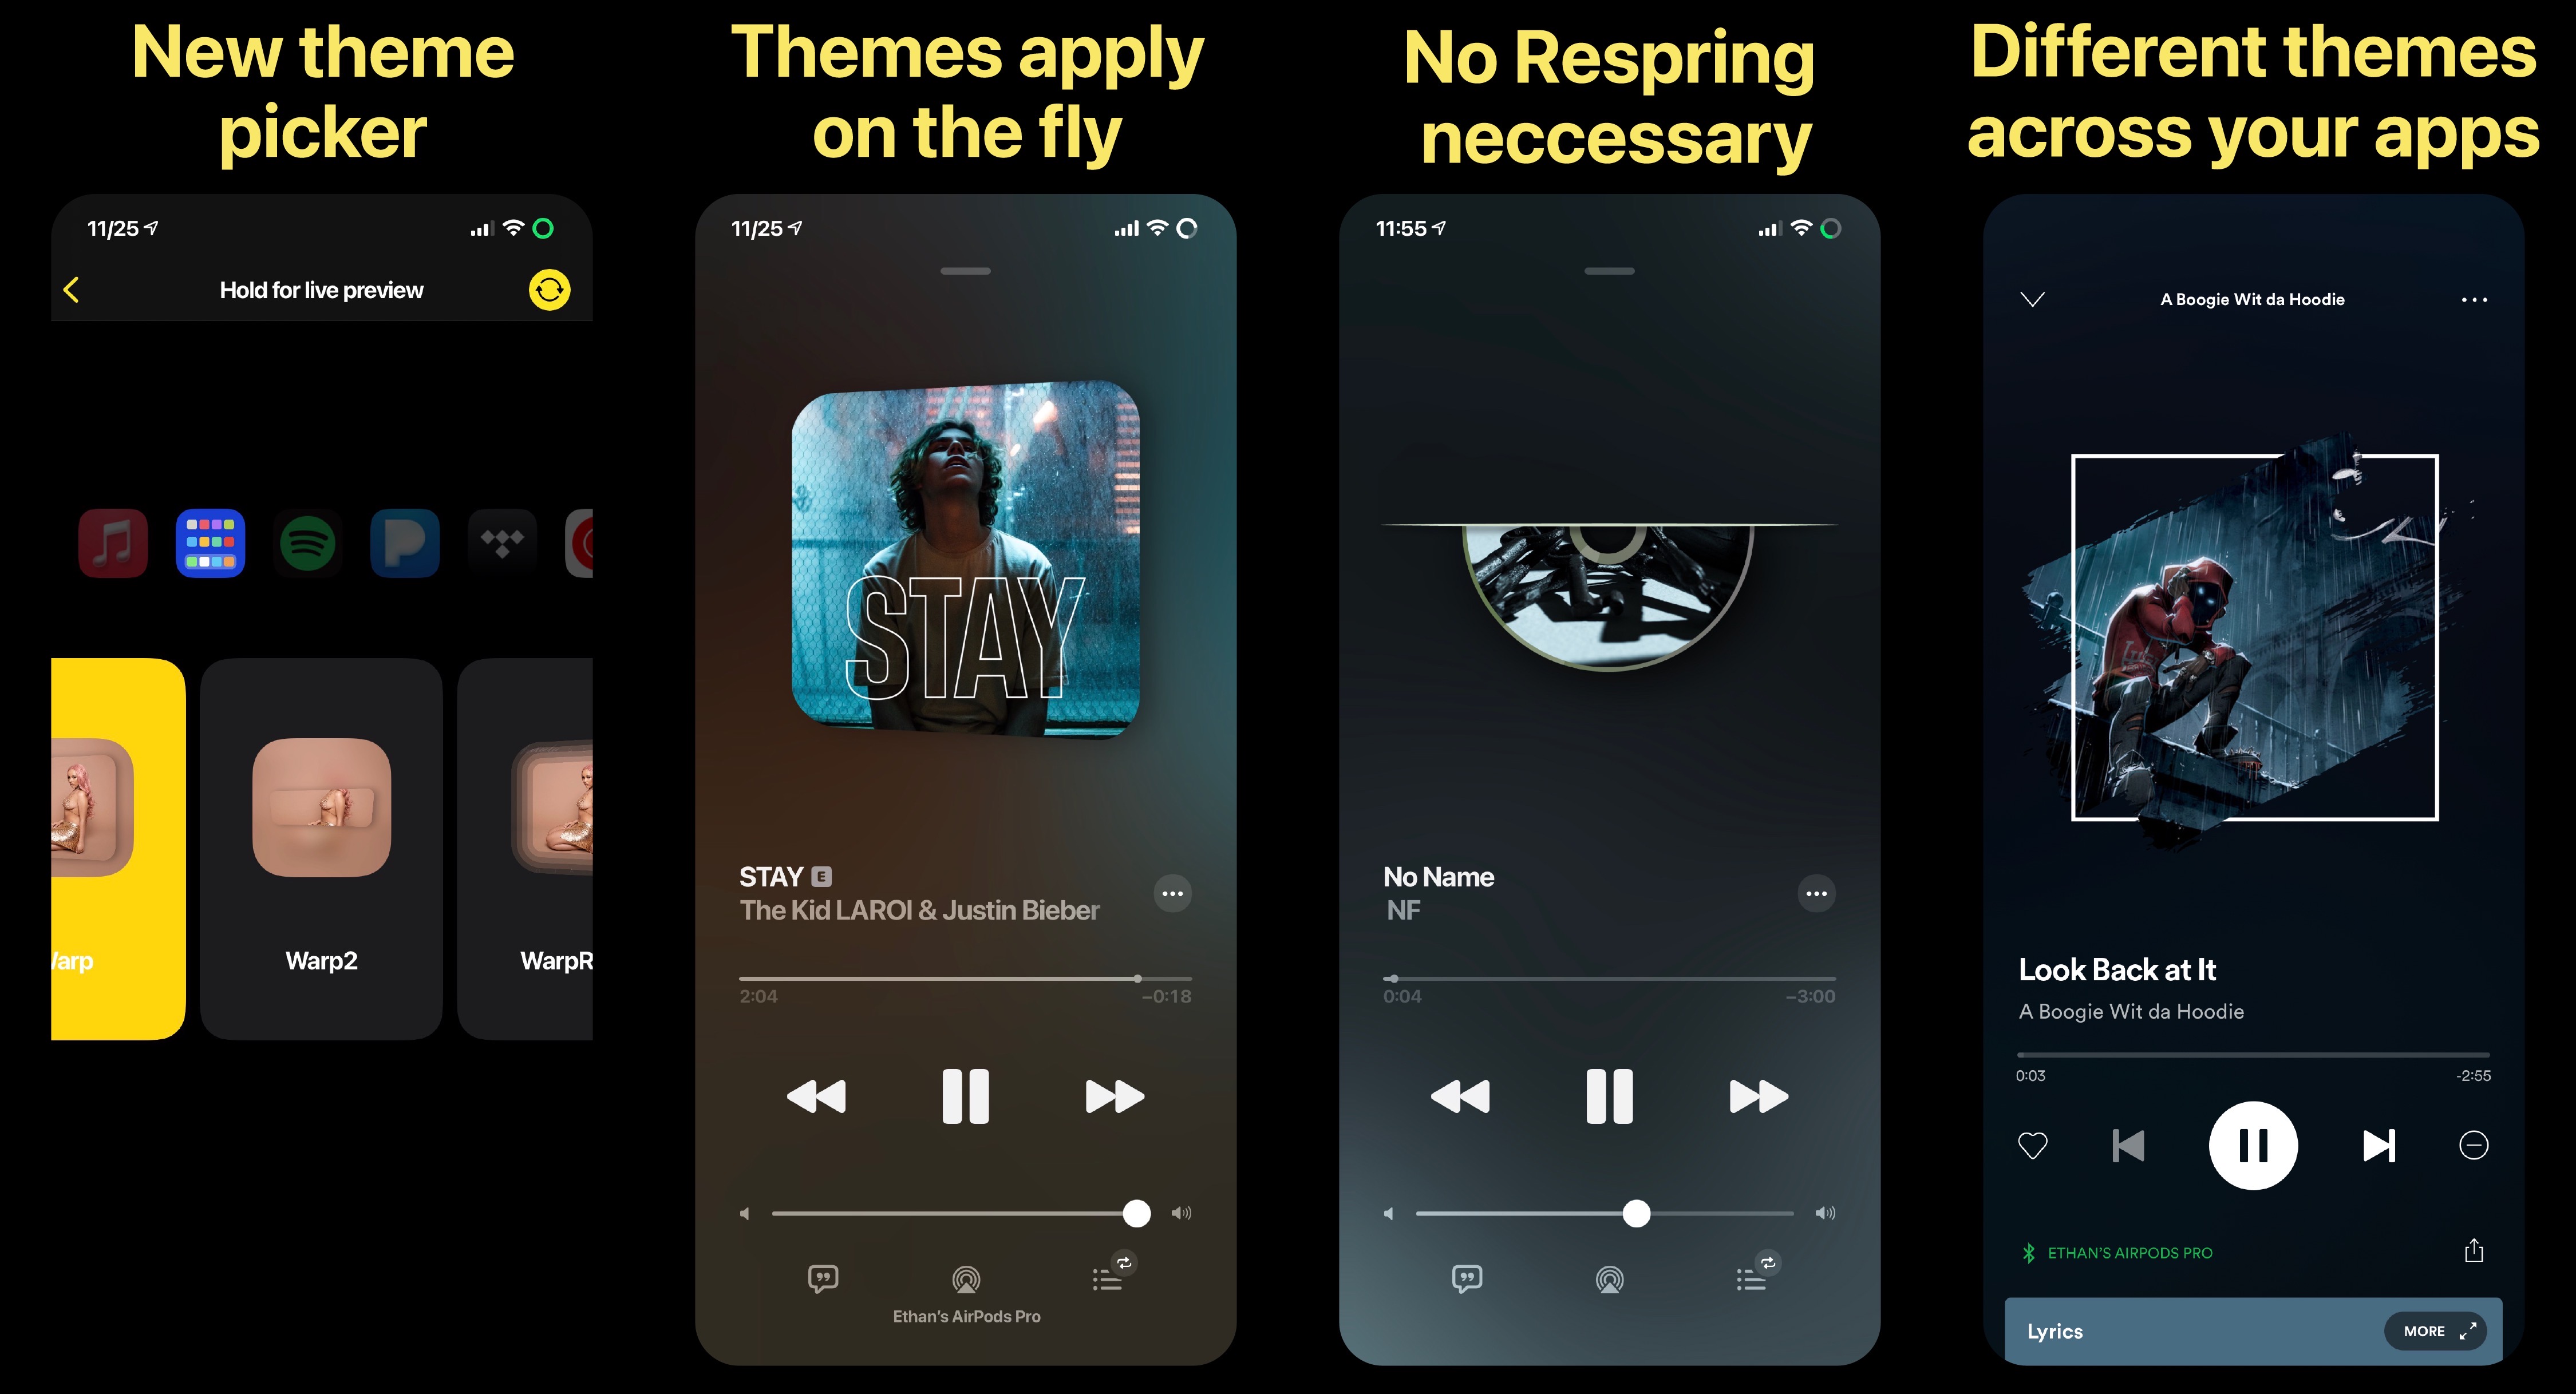 N95 themes the Apple Music Now Playing interface.